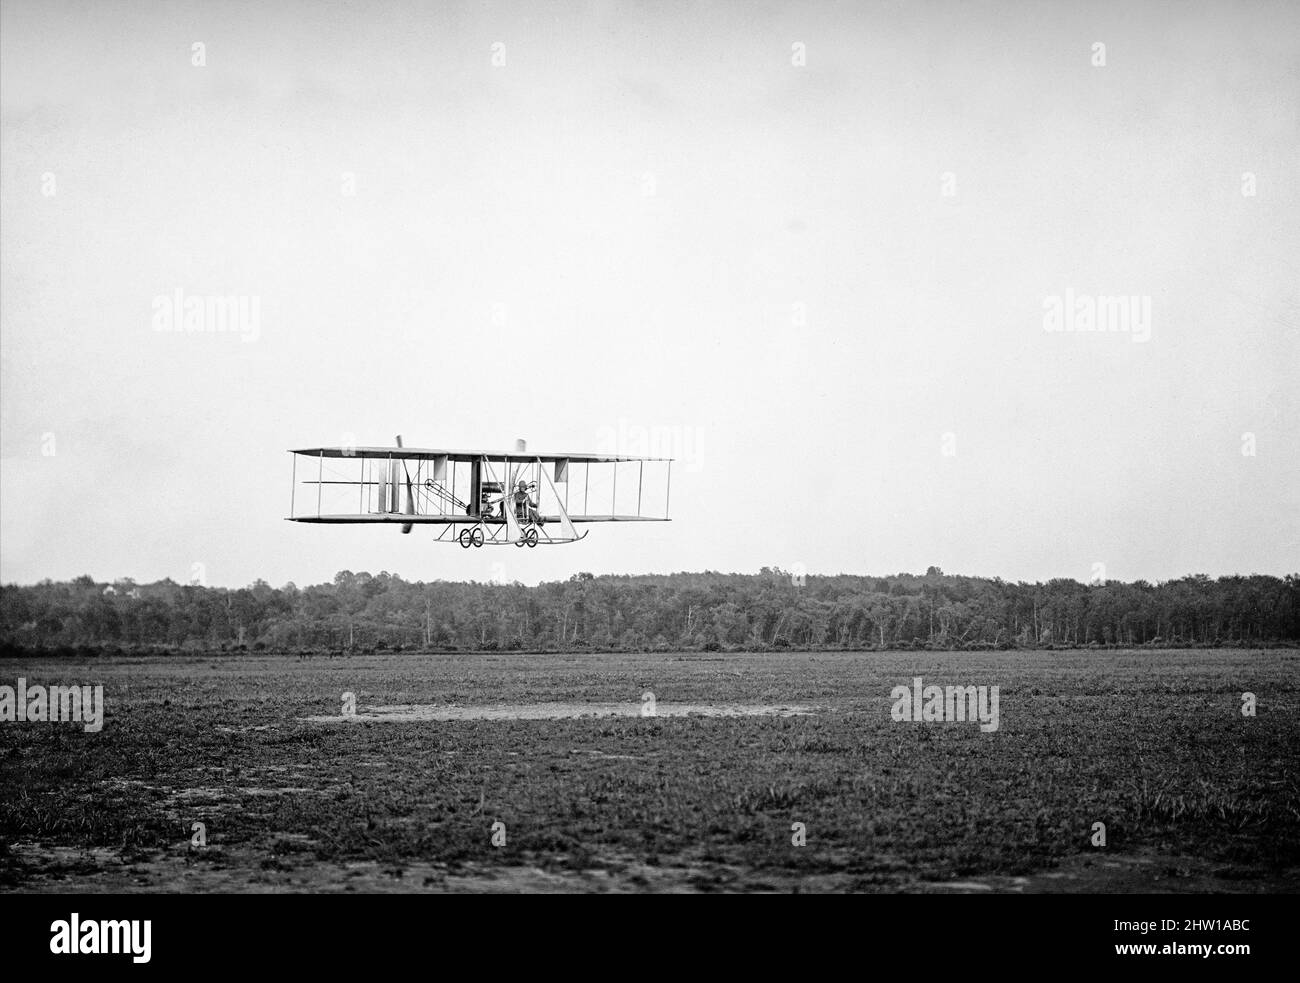 An early 20th century photograph of a Wright Biplane Type B flown by Lt Harry Graham at College Park Aviation Field in Maryland, United States of America. The Wright Machine invented and developed by the Wright brothers, Orville and Wilbur, American aviation pioneers who are generally credited with inventing aircraft controls that made fixed-wing powered flight possible enabling the first controlled, sustained flight of a powered, heavier-than-air aircraft with the Wright Flyer on December 17, 1903. Stock Photo